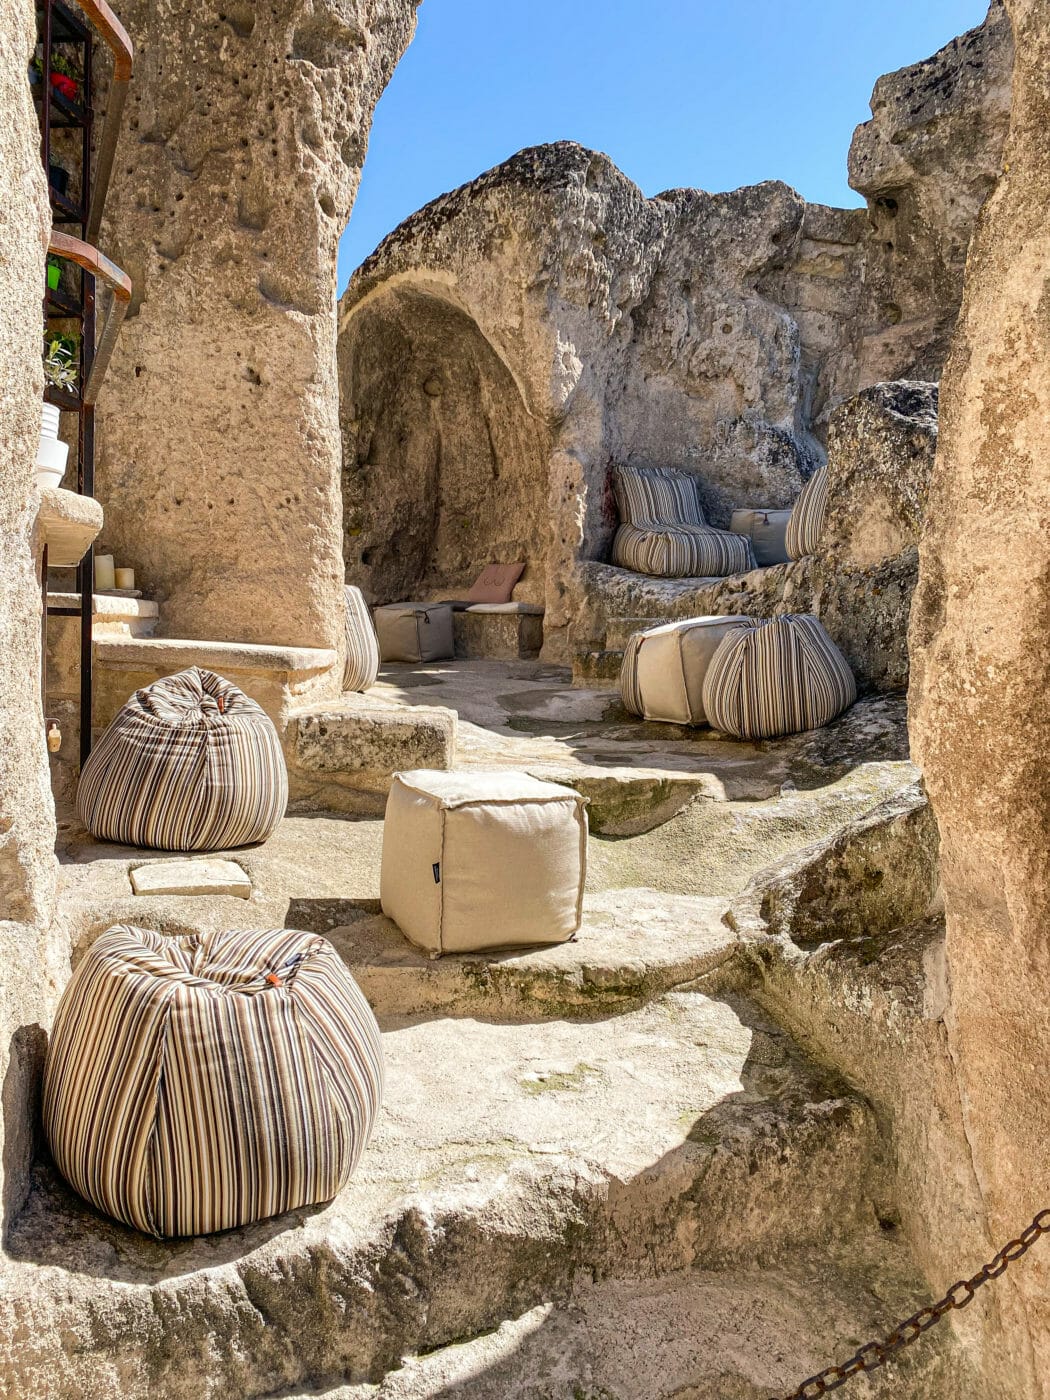 Quaint little outdoors cafe' in Matera Italy